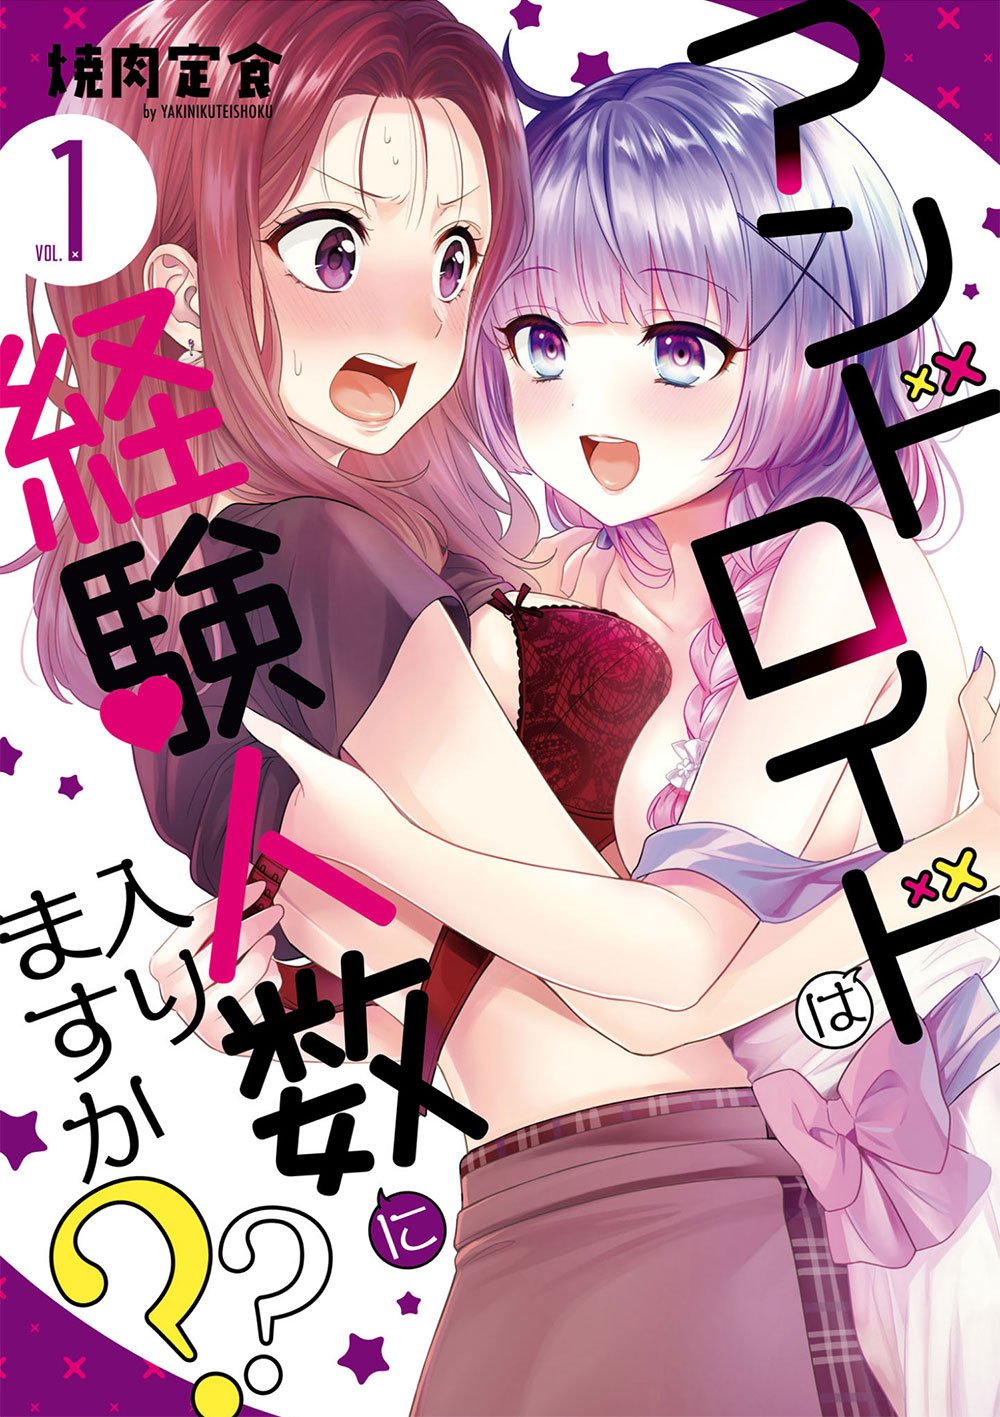 Seven Seas Licenses “Does it Count if You Lose Your Virginity to an  Android?” Yuri Manga Series — Yuri Anime News 百合